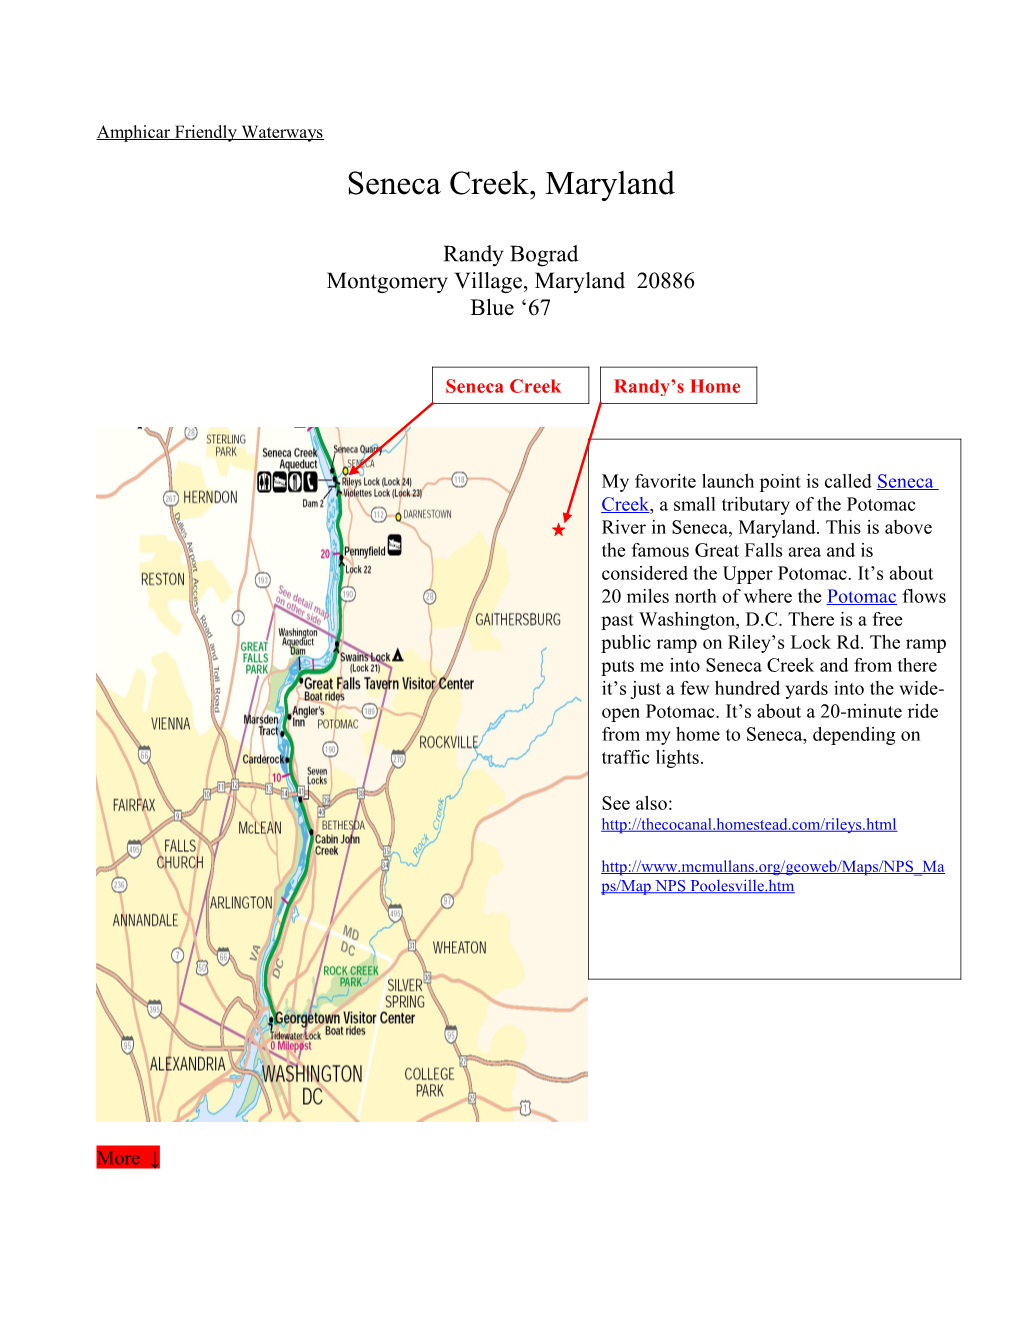 My Favorite Launch Point Is Called Seneca Creek, a Small River Just Off the Potomac River